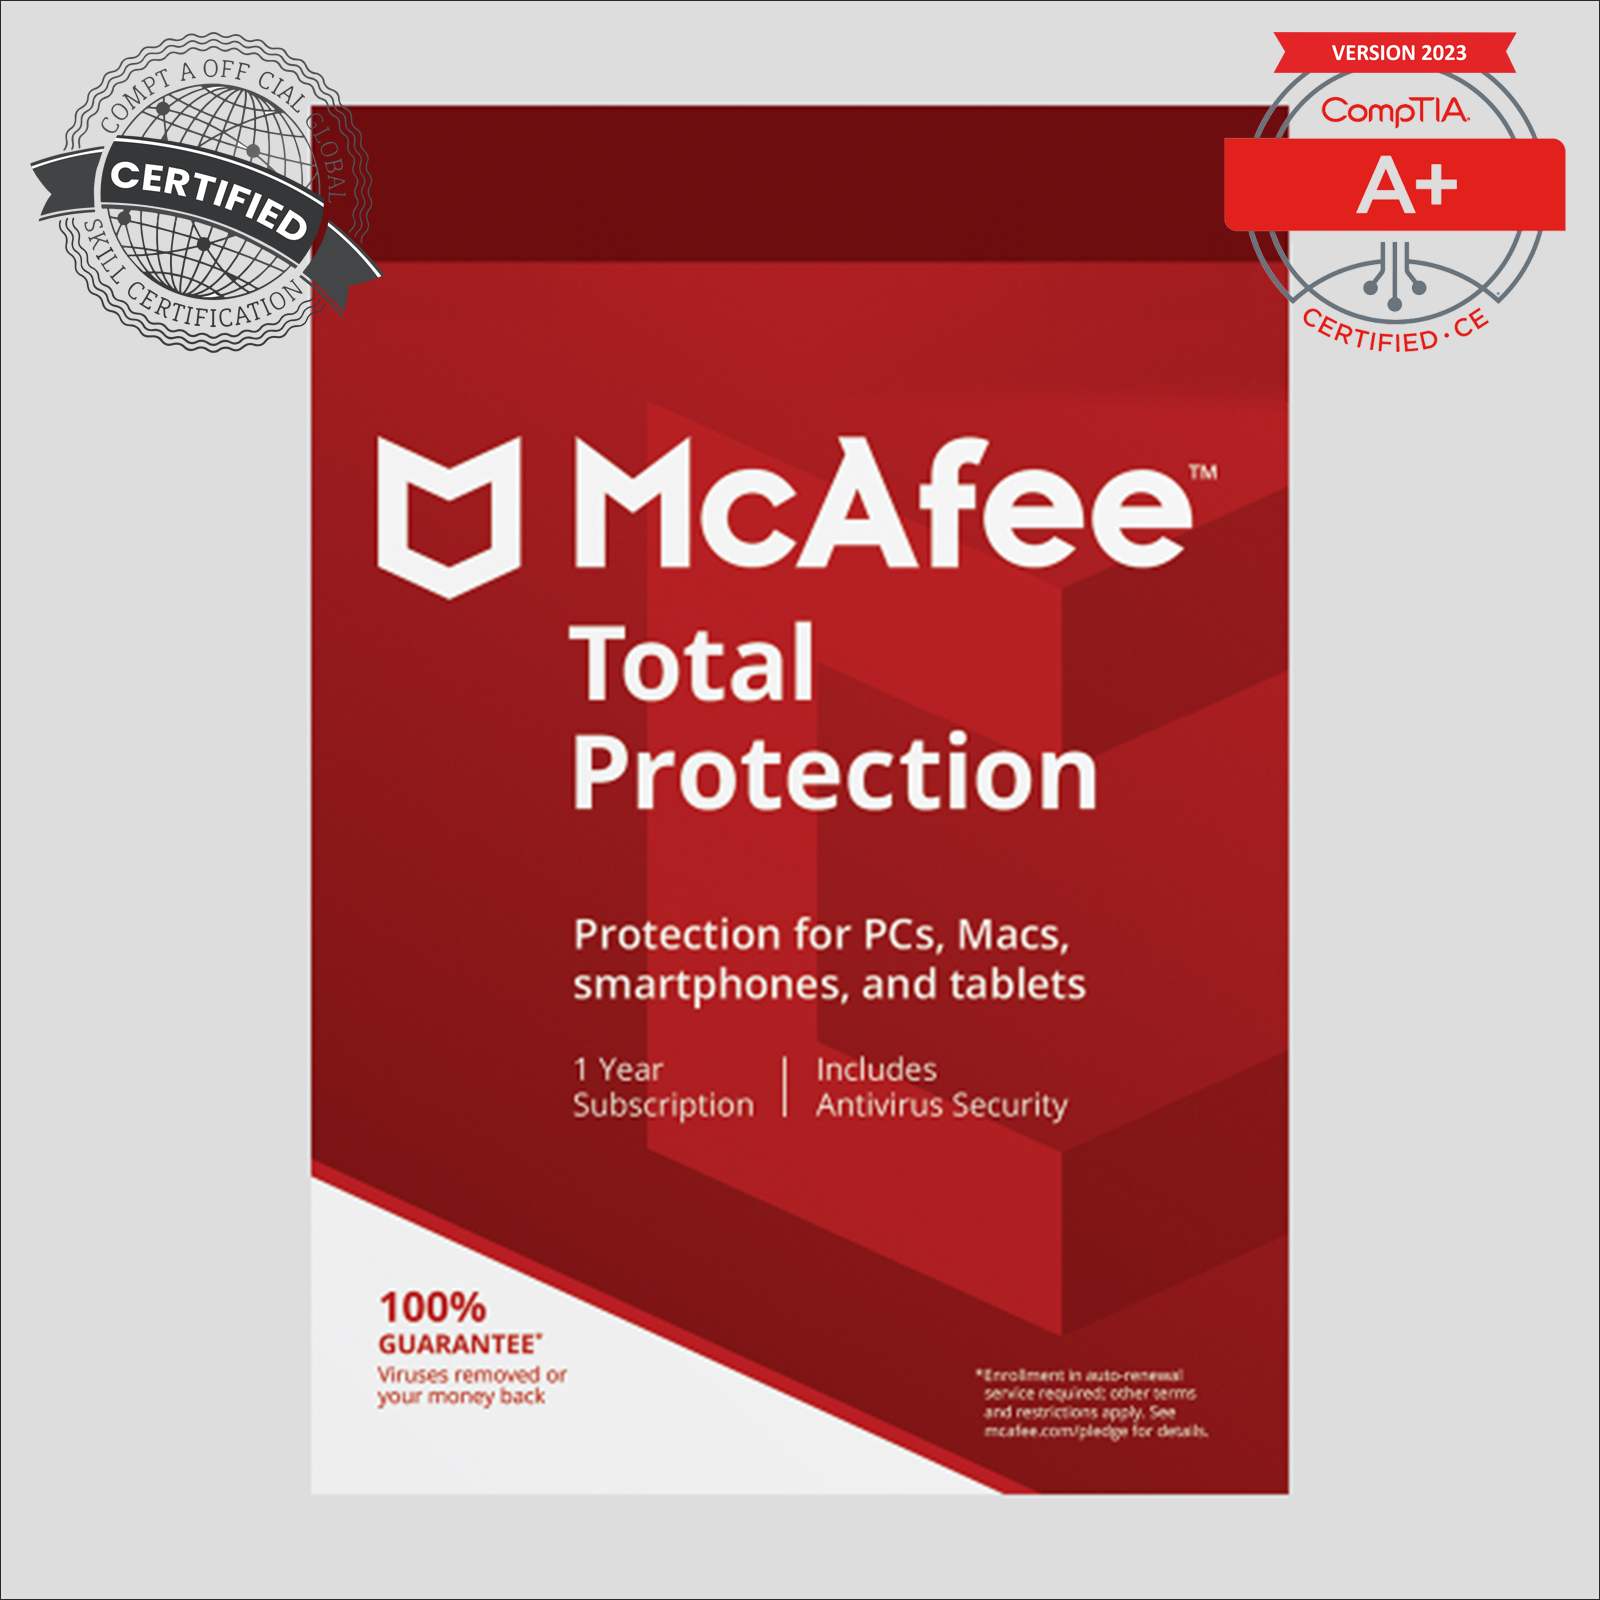 McAfee Total Protection - 1-Year / 3-Devices - USA/Canada